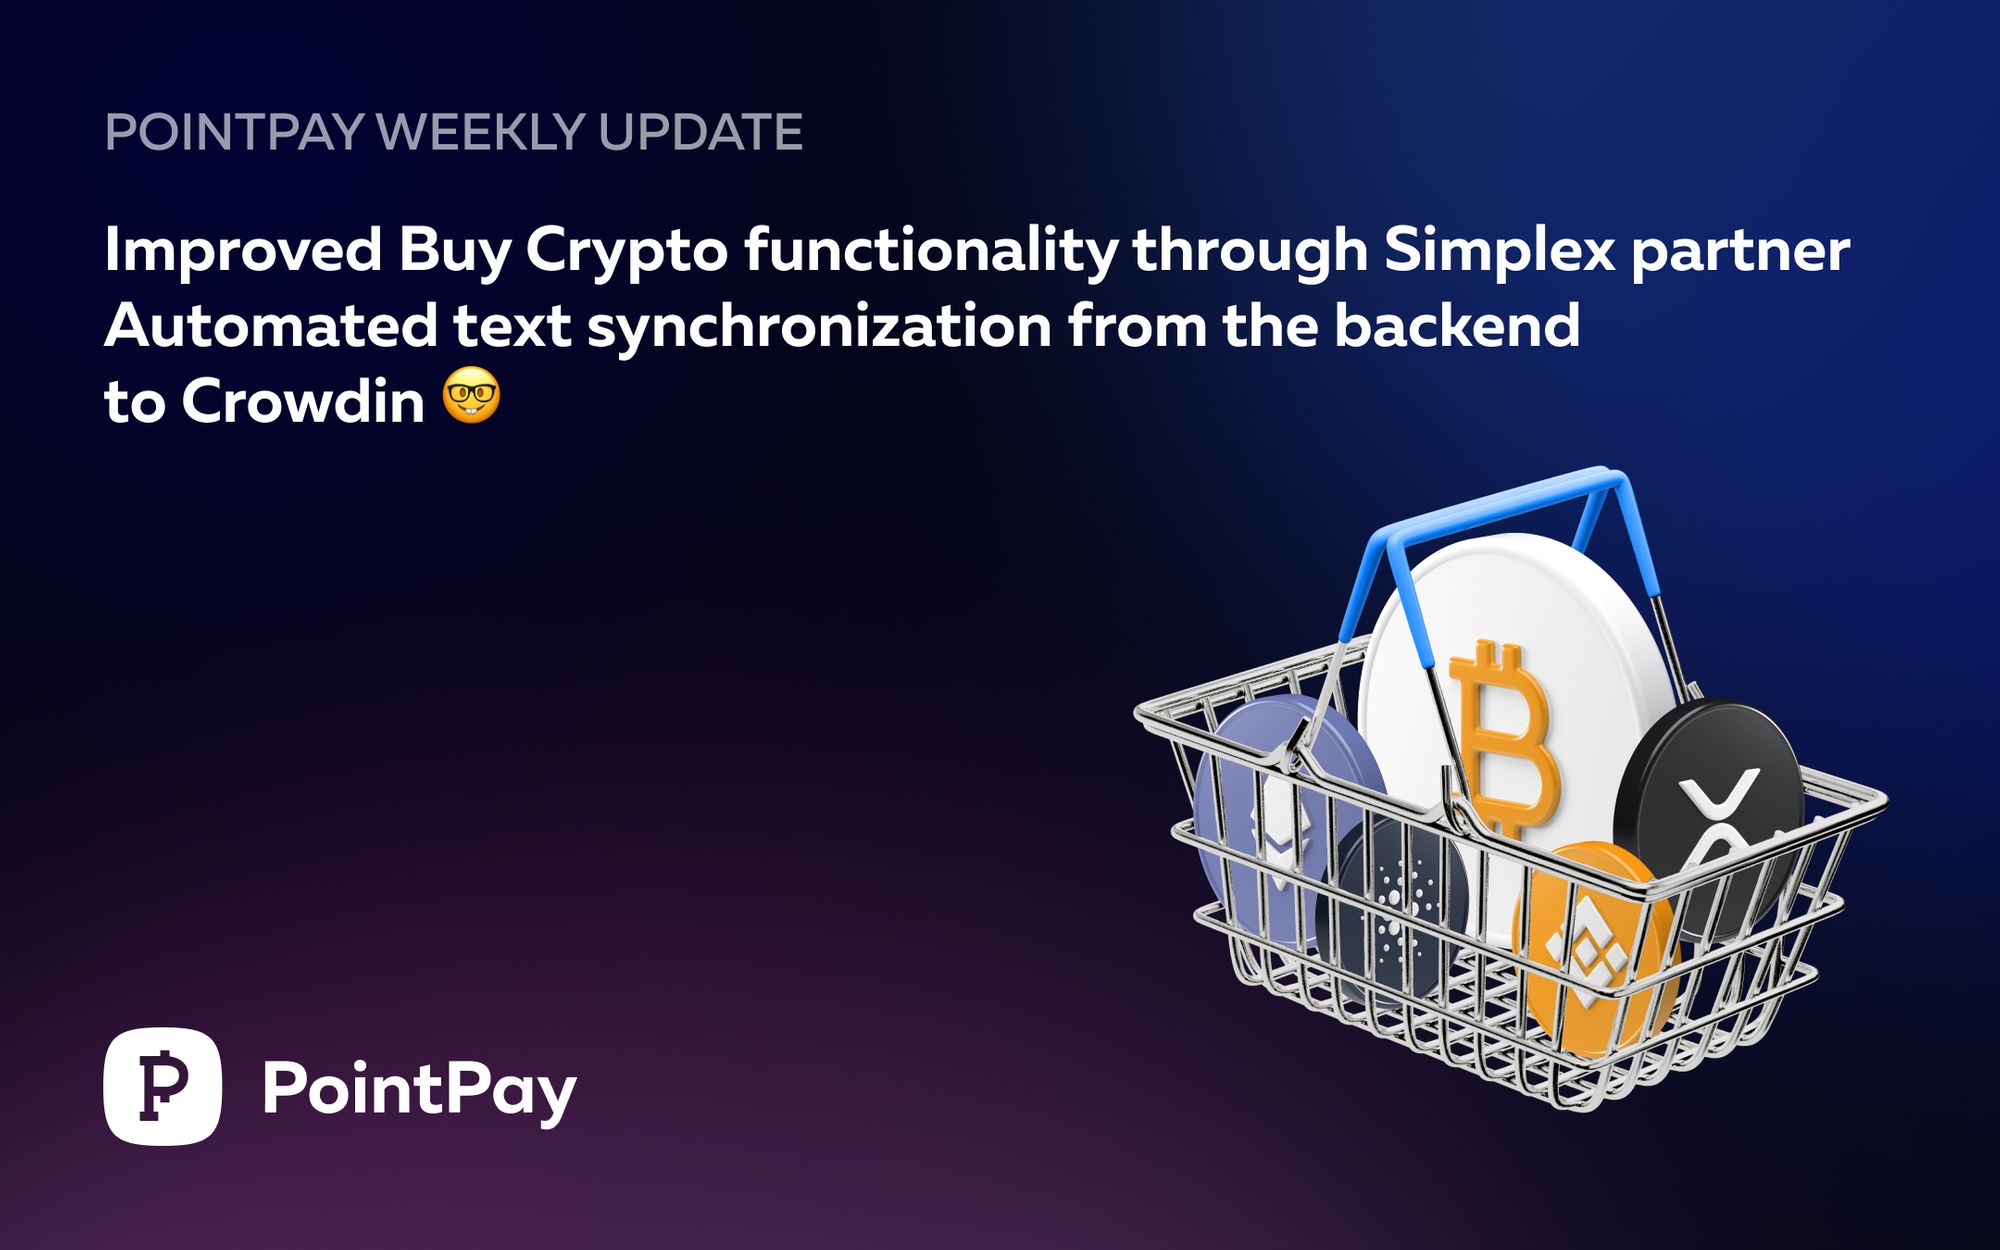 PointPay Weekly Update (27 February - 3 March 2023)